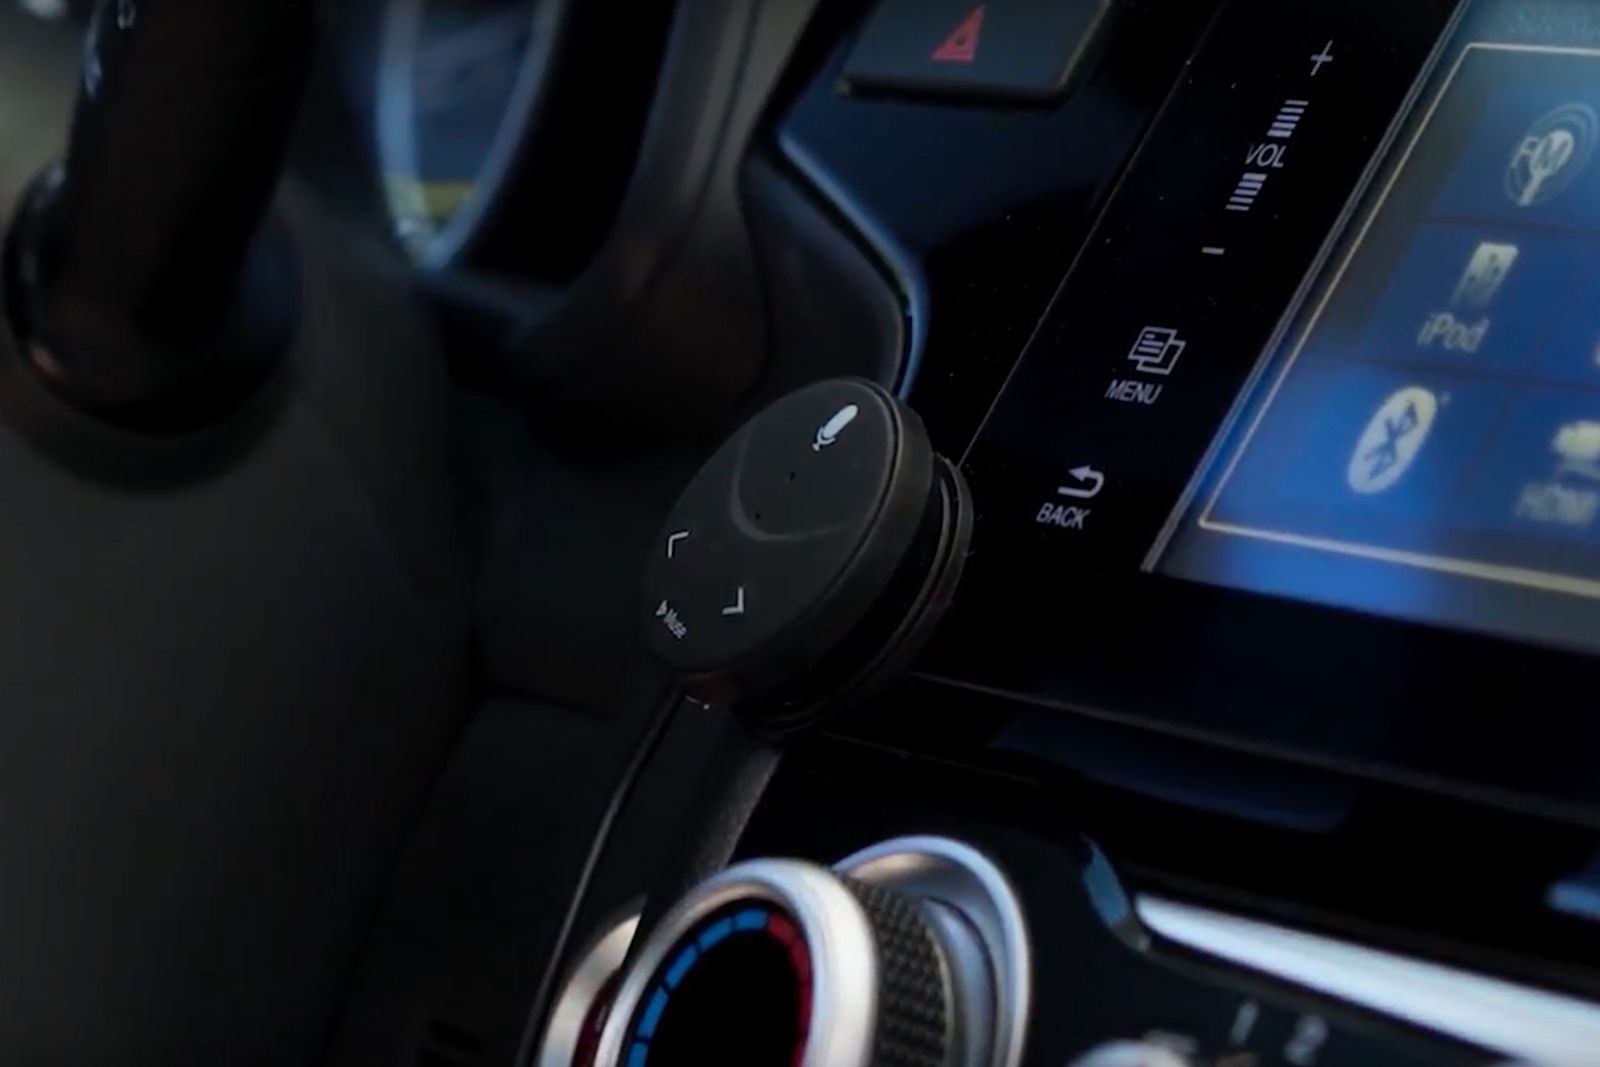 Muse is an Alexa device for your car that lets you control music navigation image 1